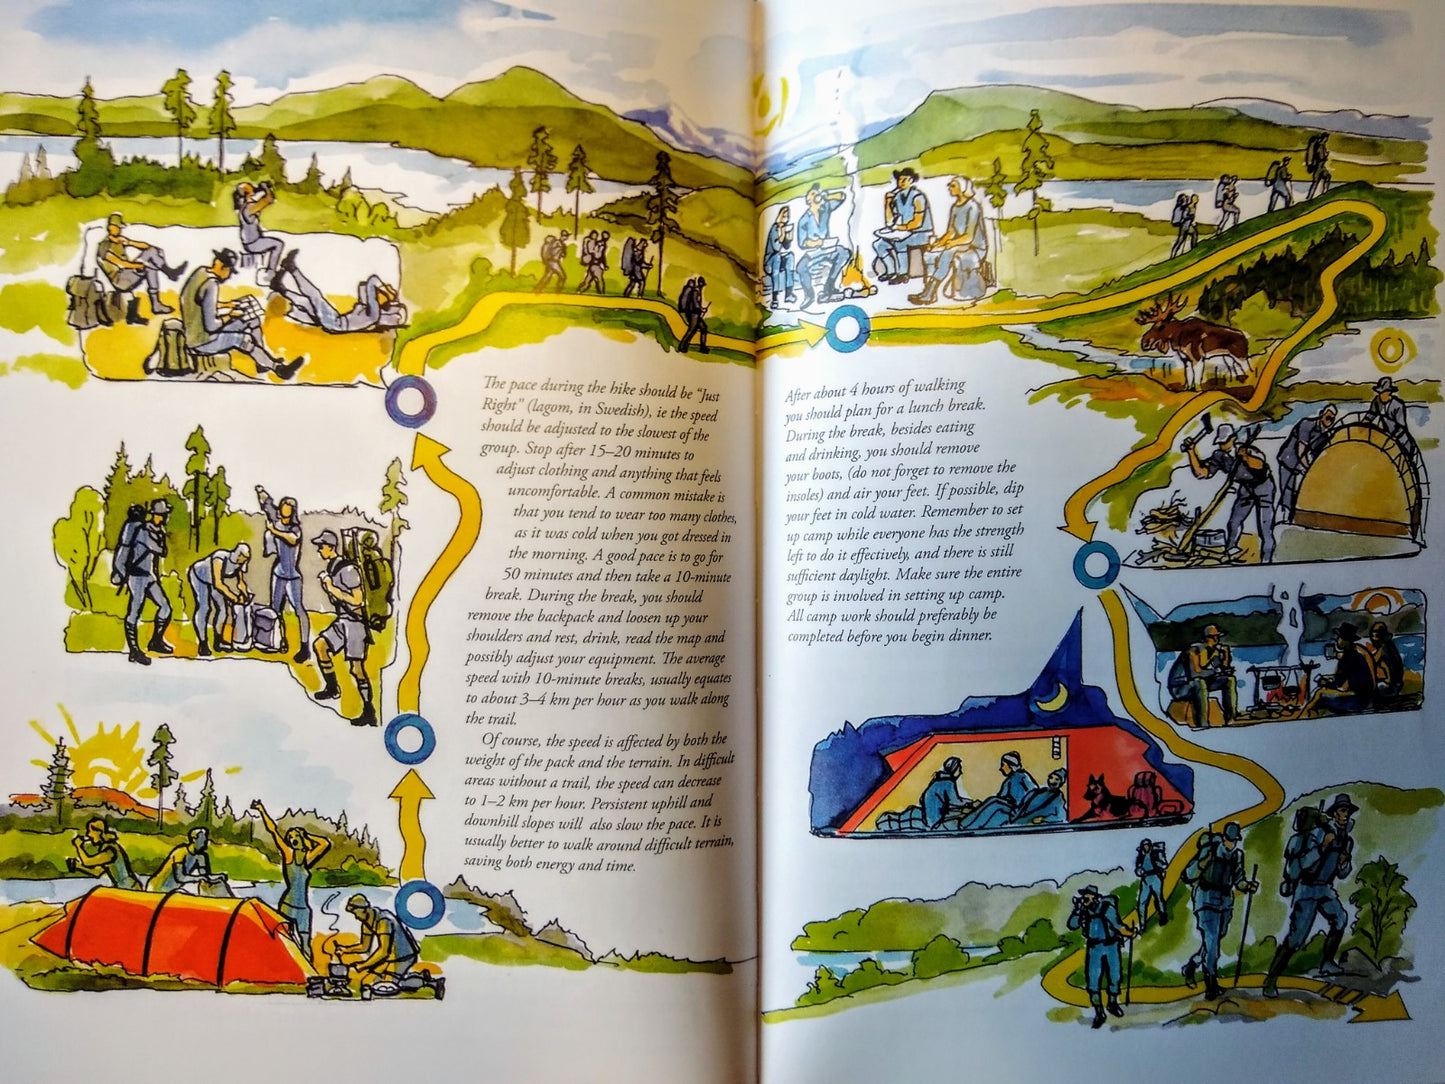 Outdoors the Scandinavian Way by Lars Fält - sample page on hiking in the wilderness.